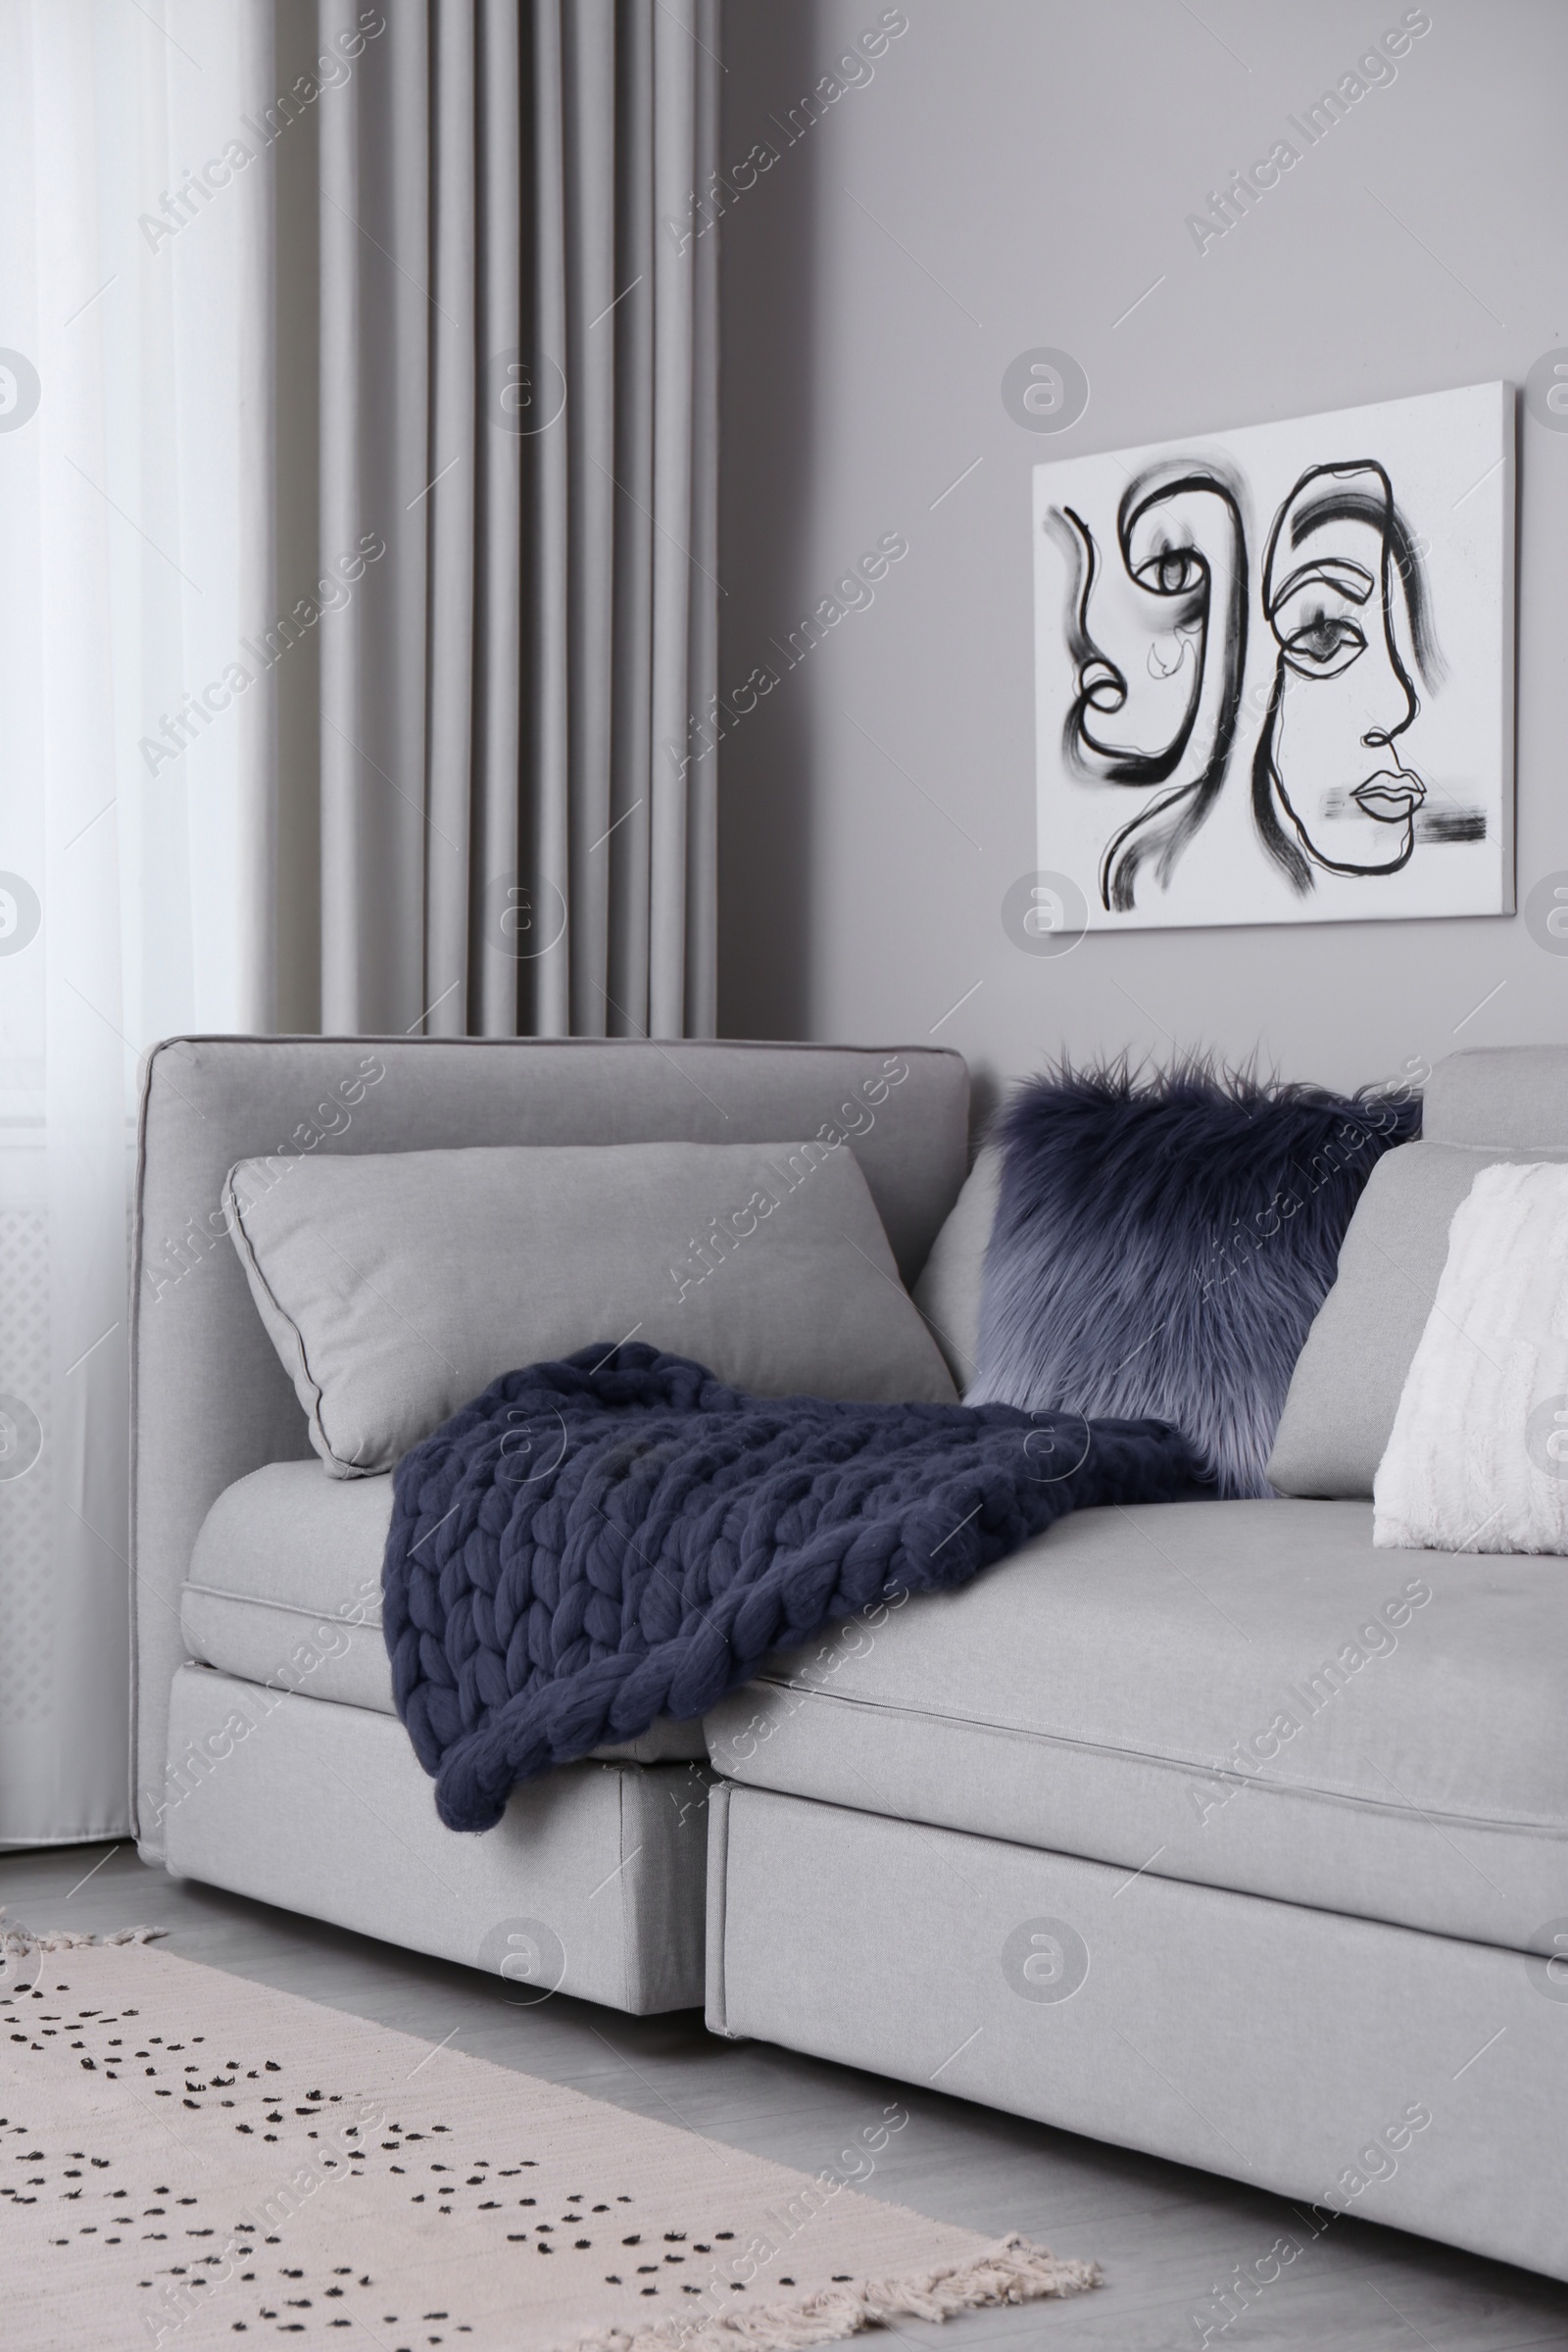 Photo of Living room interior with knitted merino wool blanket on sofa